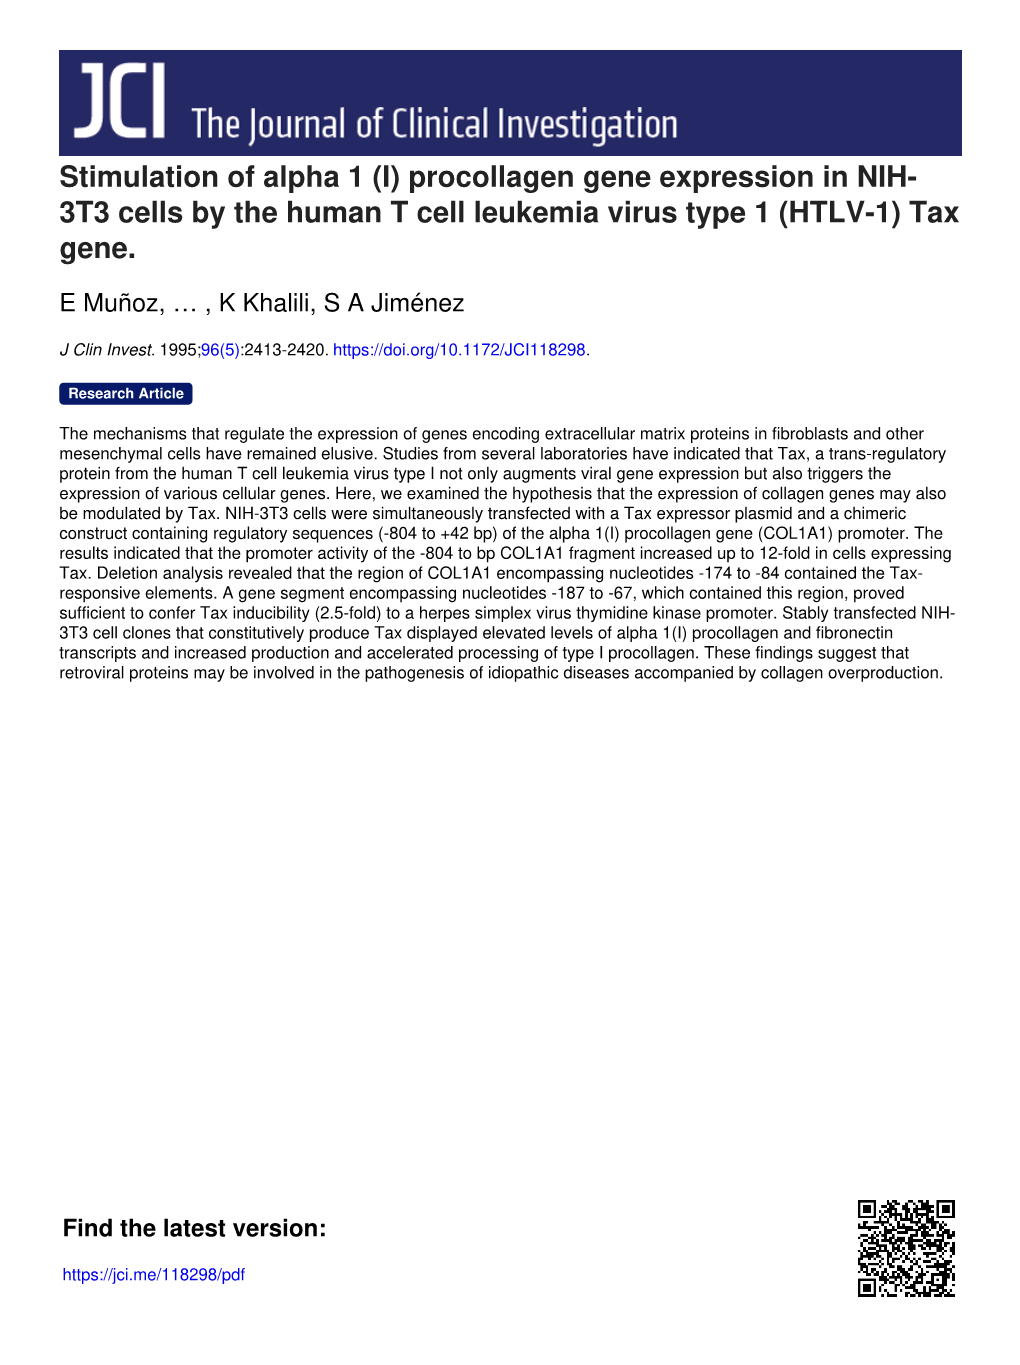 (I) Procollagen Gene Expression in NIH- 3T3 Cells by the Human T Cell Leukemia Virus Type 1 (HTLV-1) Tax Gene